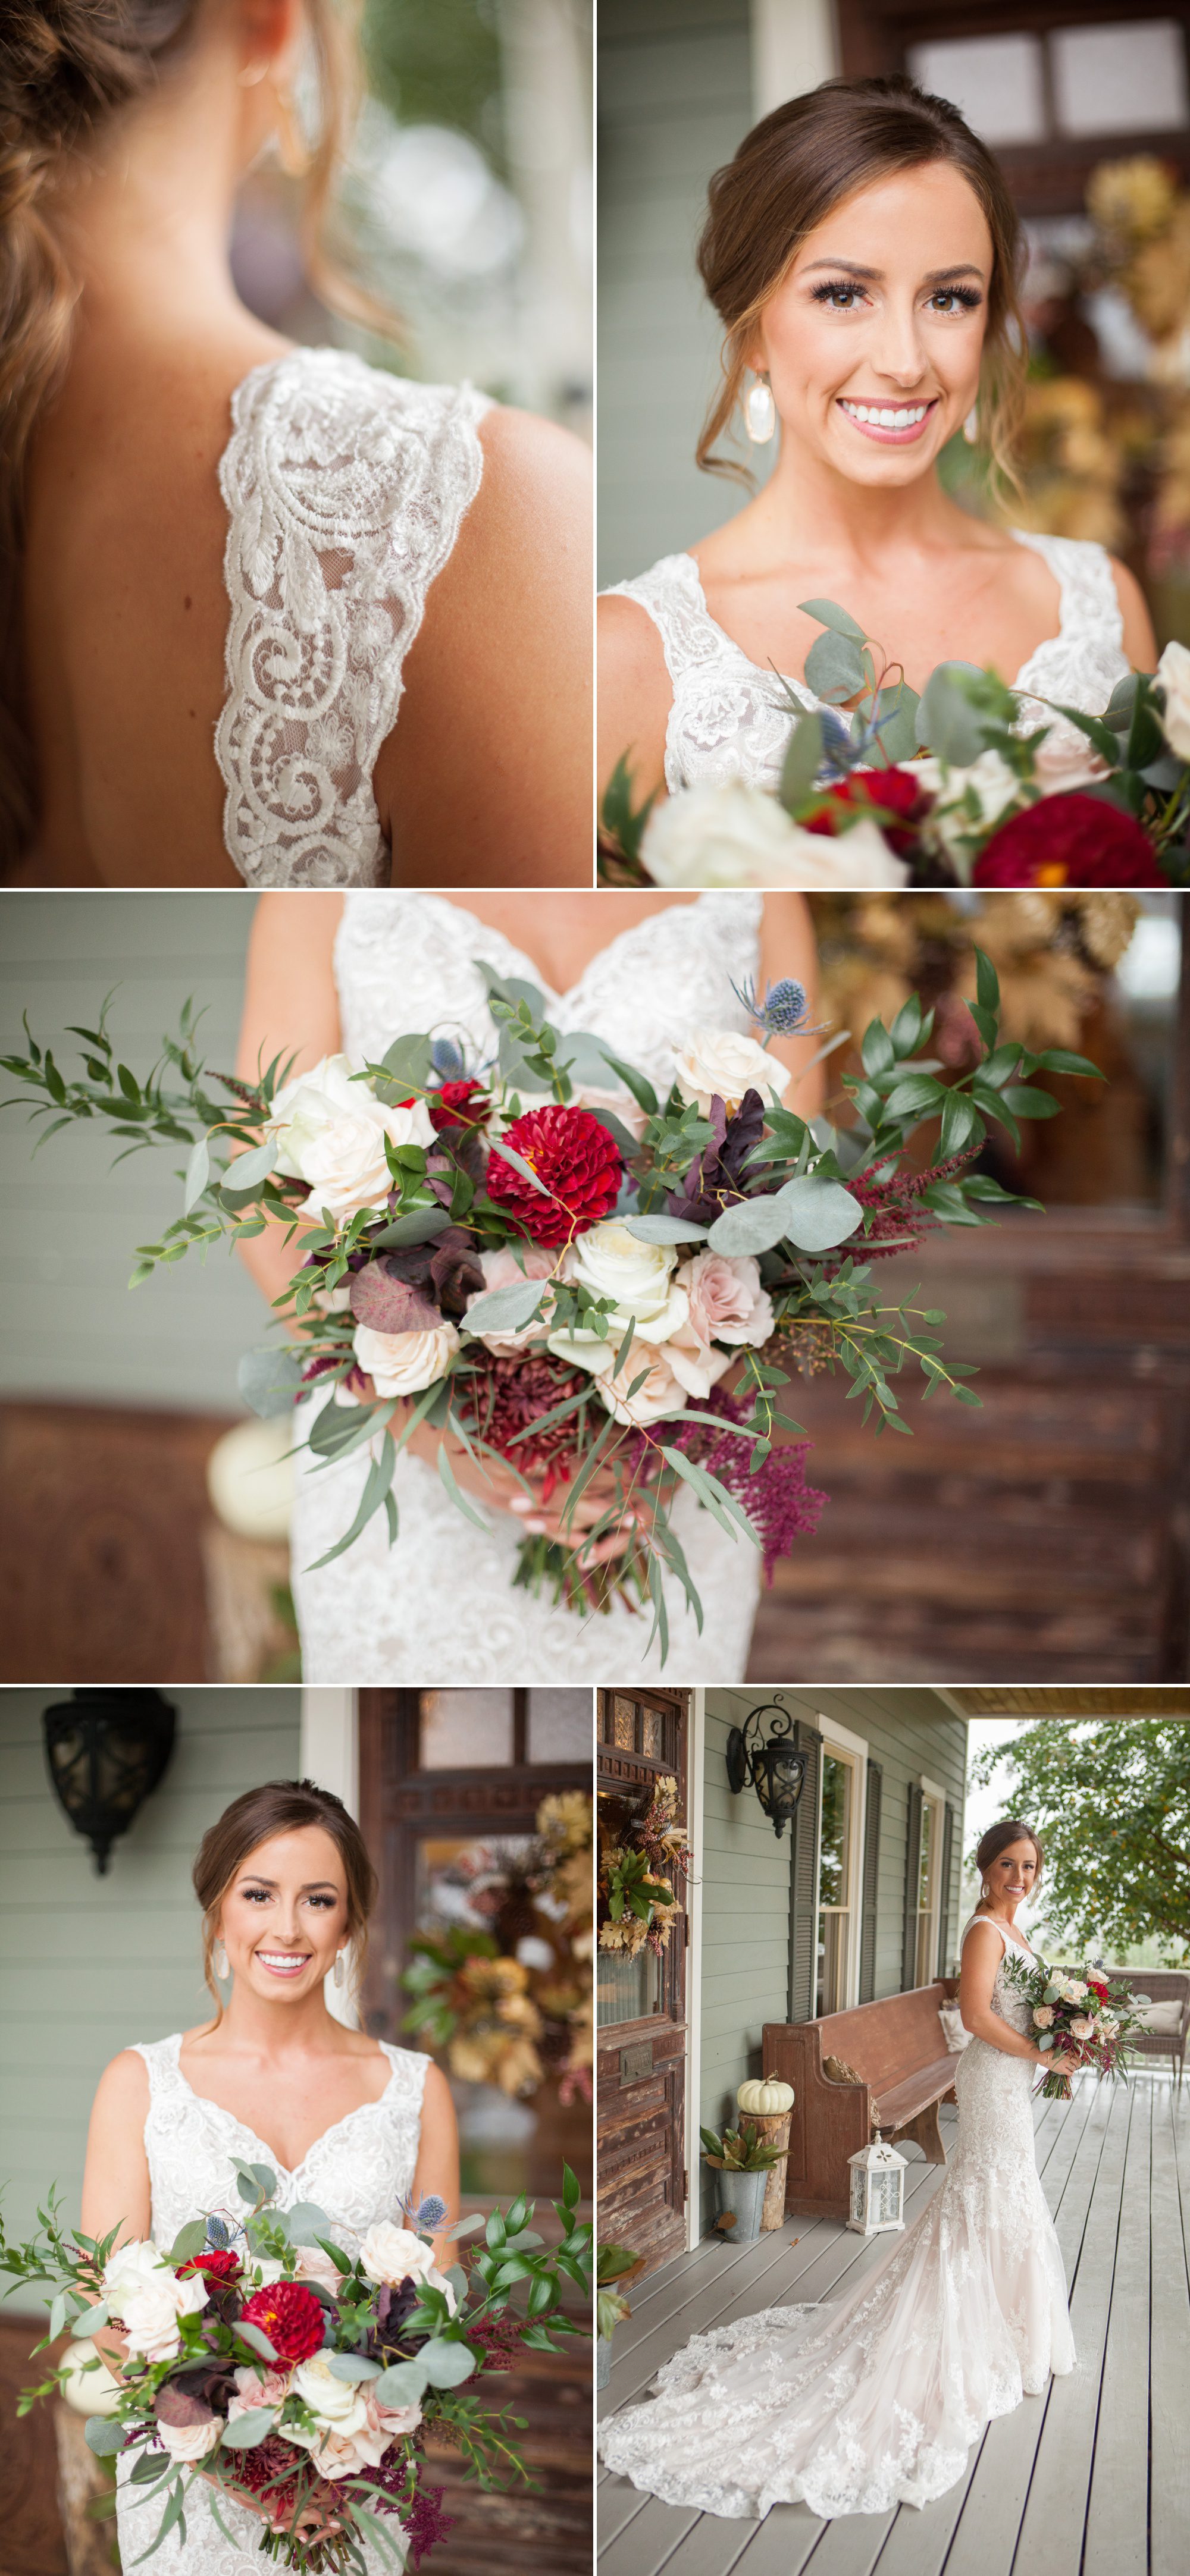 Beautiful bride with fall bouquet before wedding reception details before wedding ceremony photography at Front Porch Farms, Wedding photography by Krista Lee